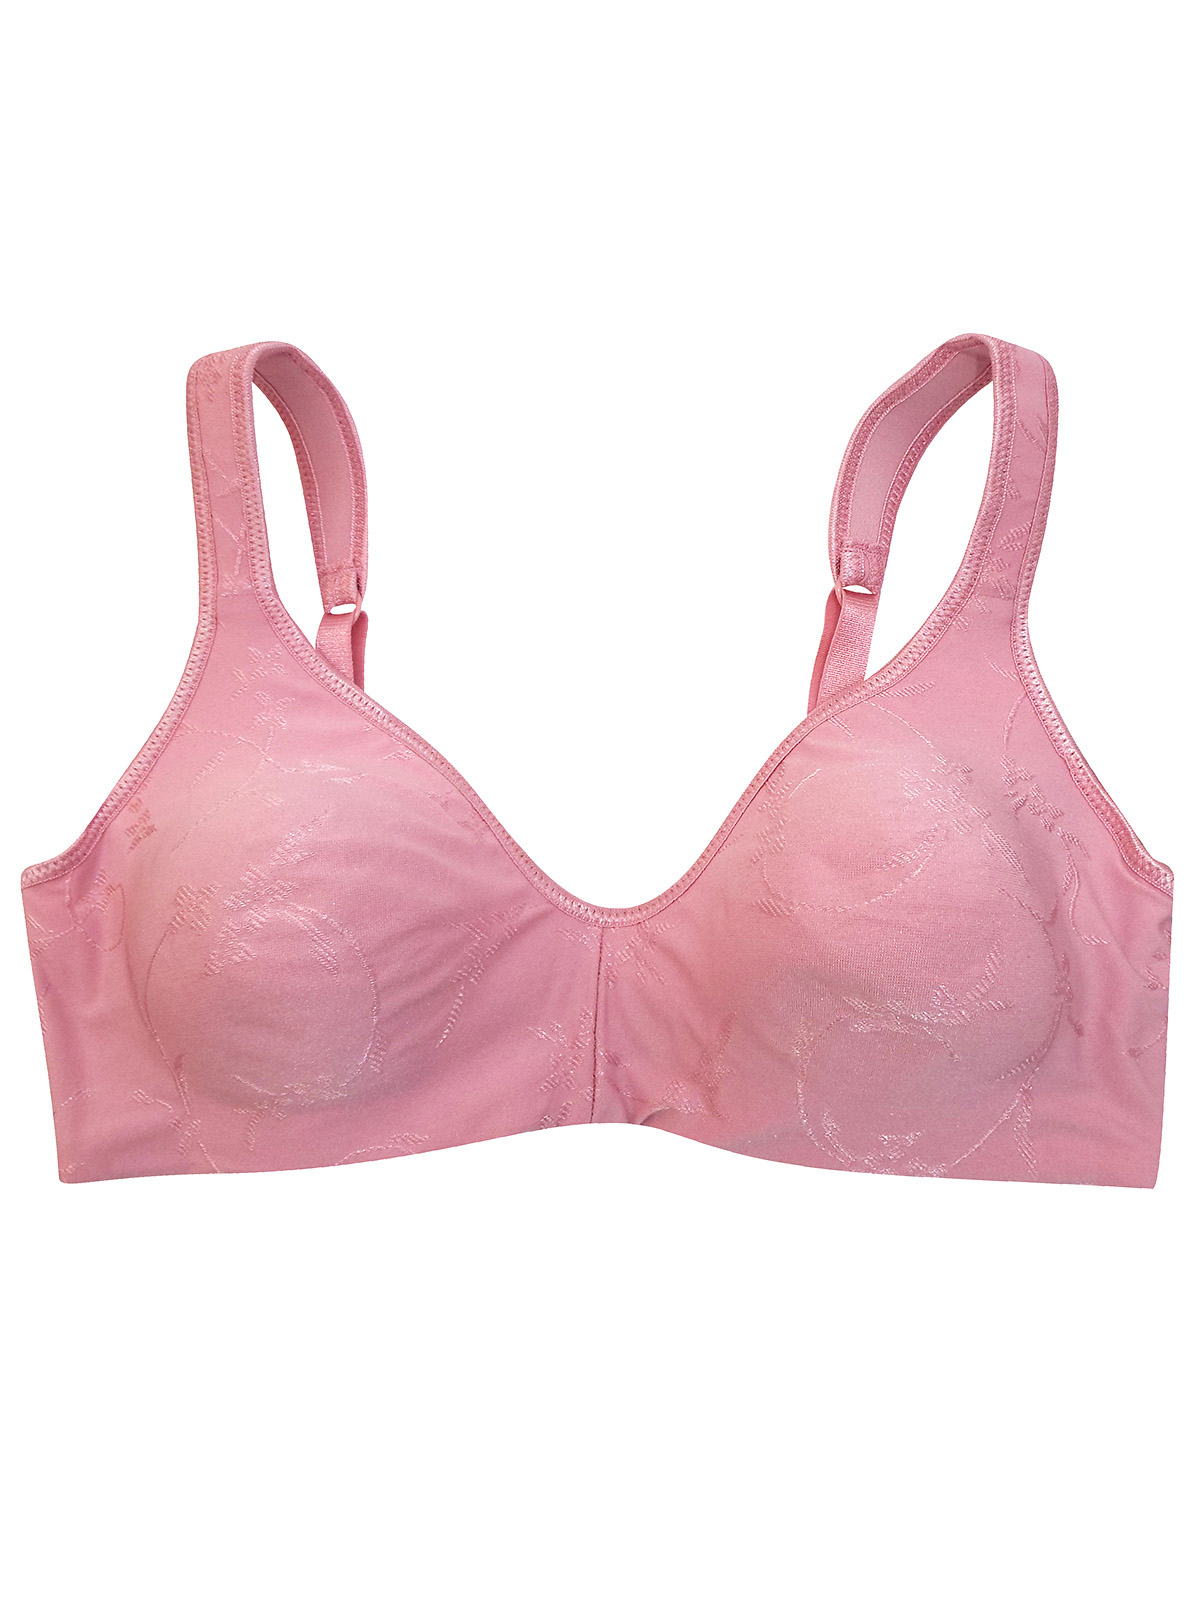 Trofe - - Trofé DUSTY-PINK Emma Jacquard Moulded Cup Non-Wired Bra - Size 34  to 42 (A-B-C